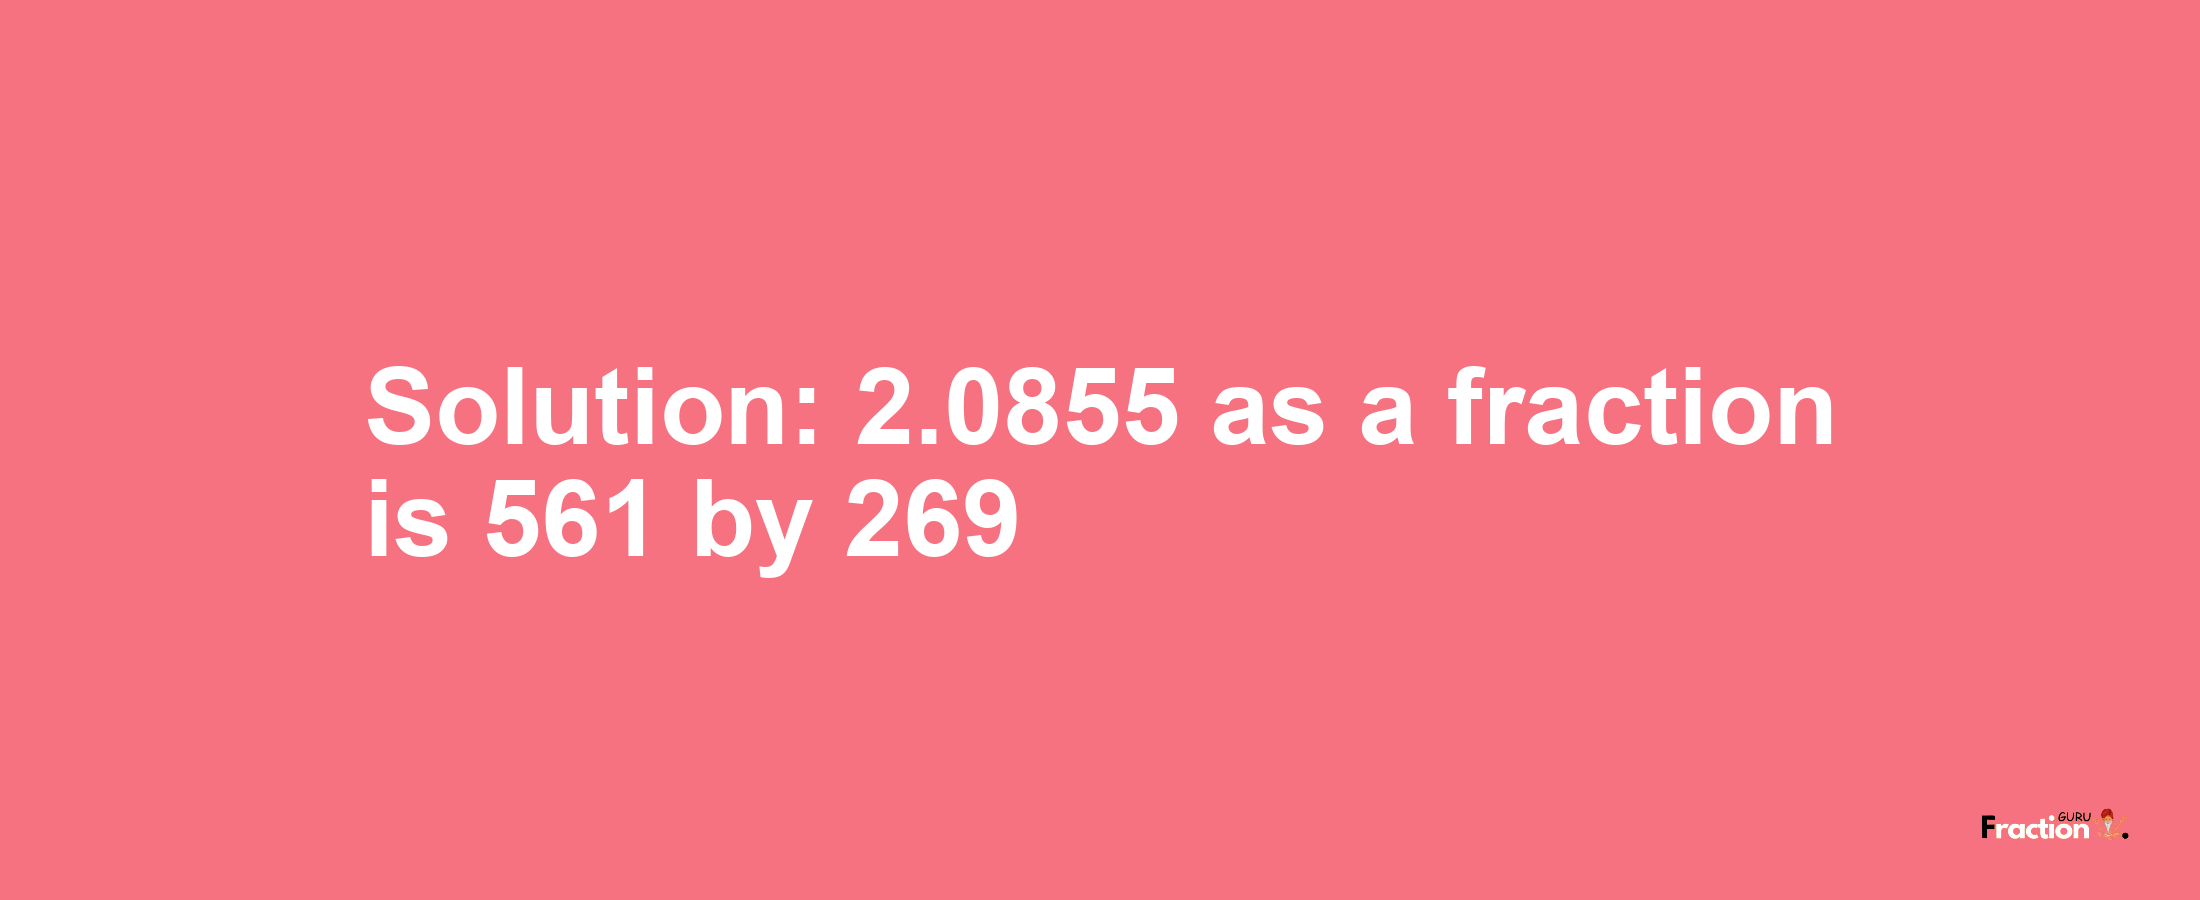 Solution:2.0855 as a fraction is 561/269